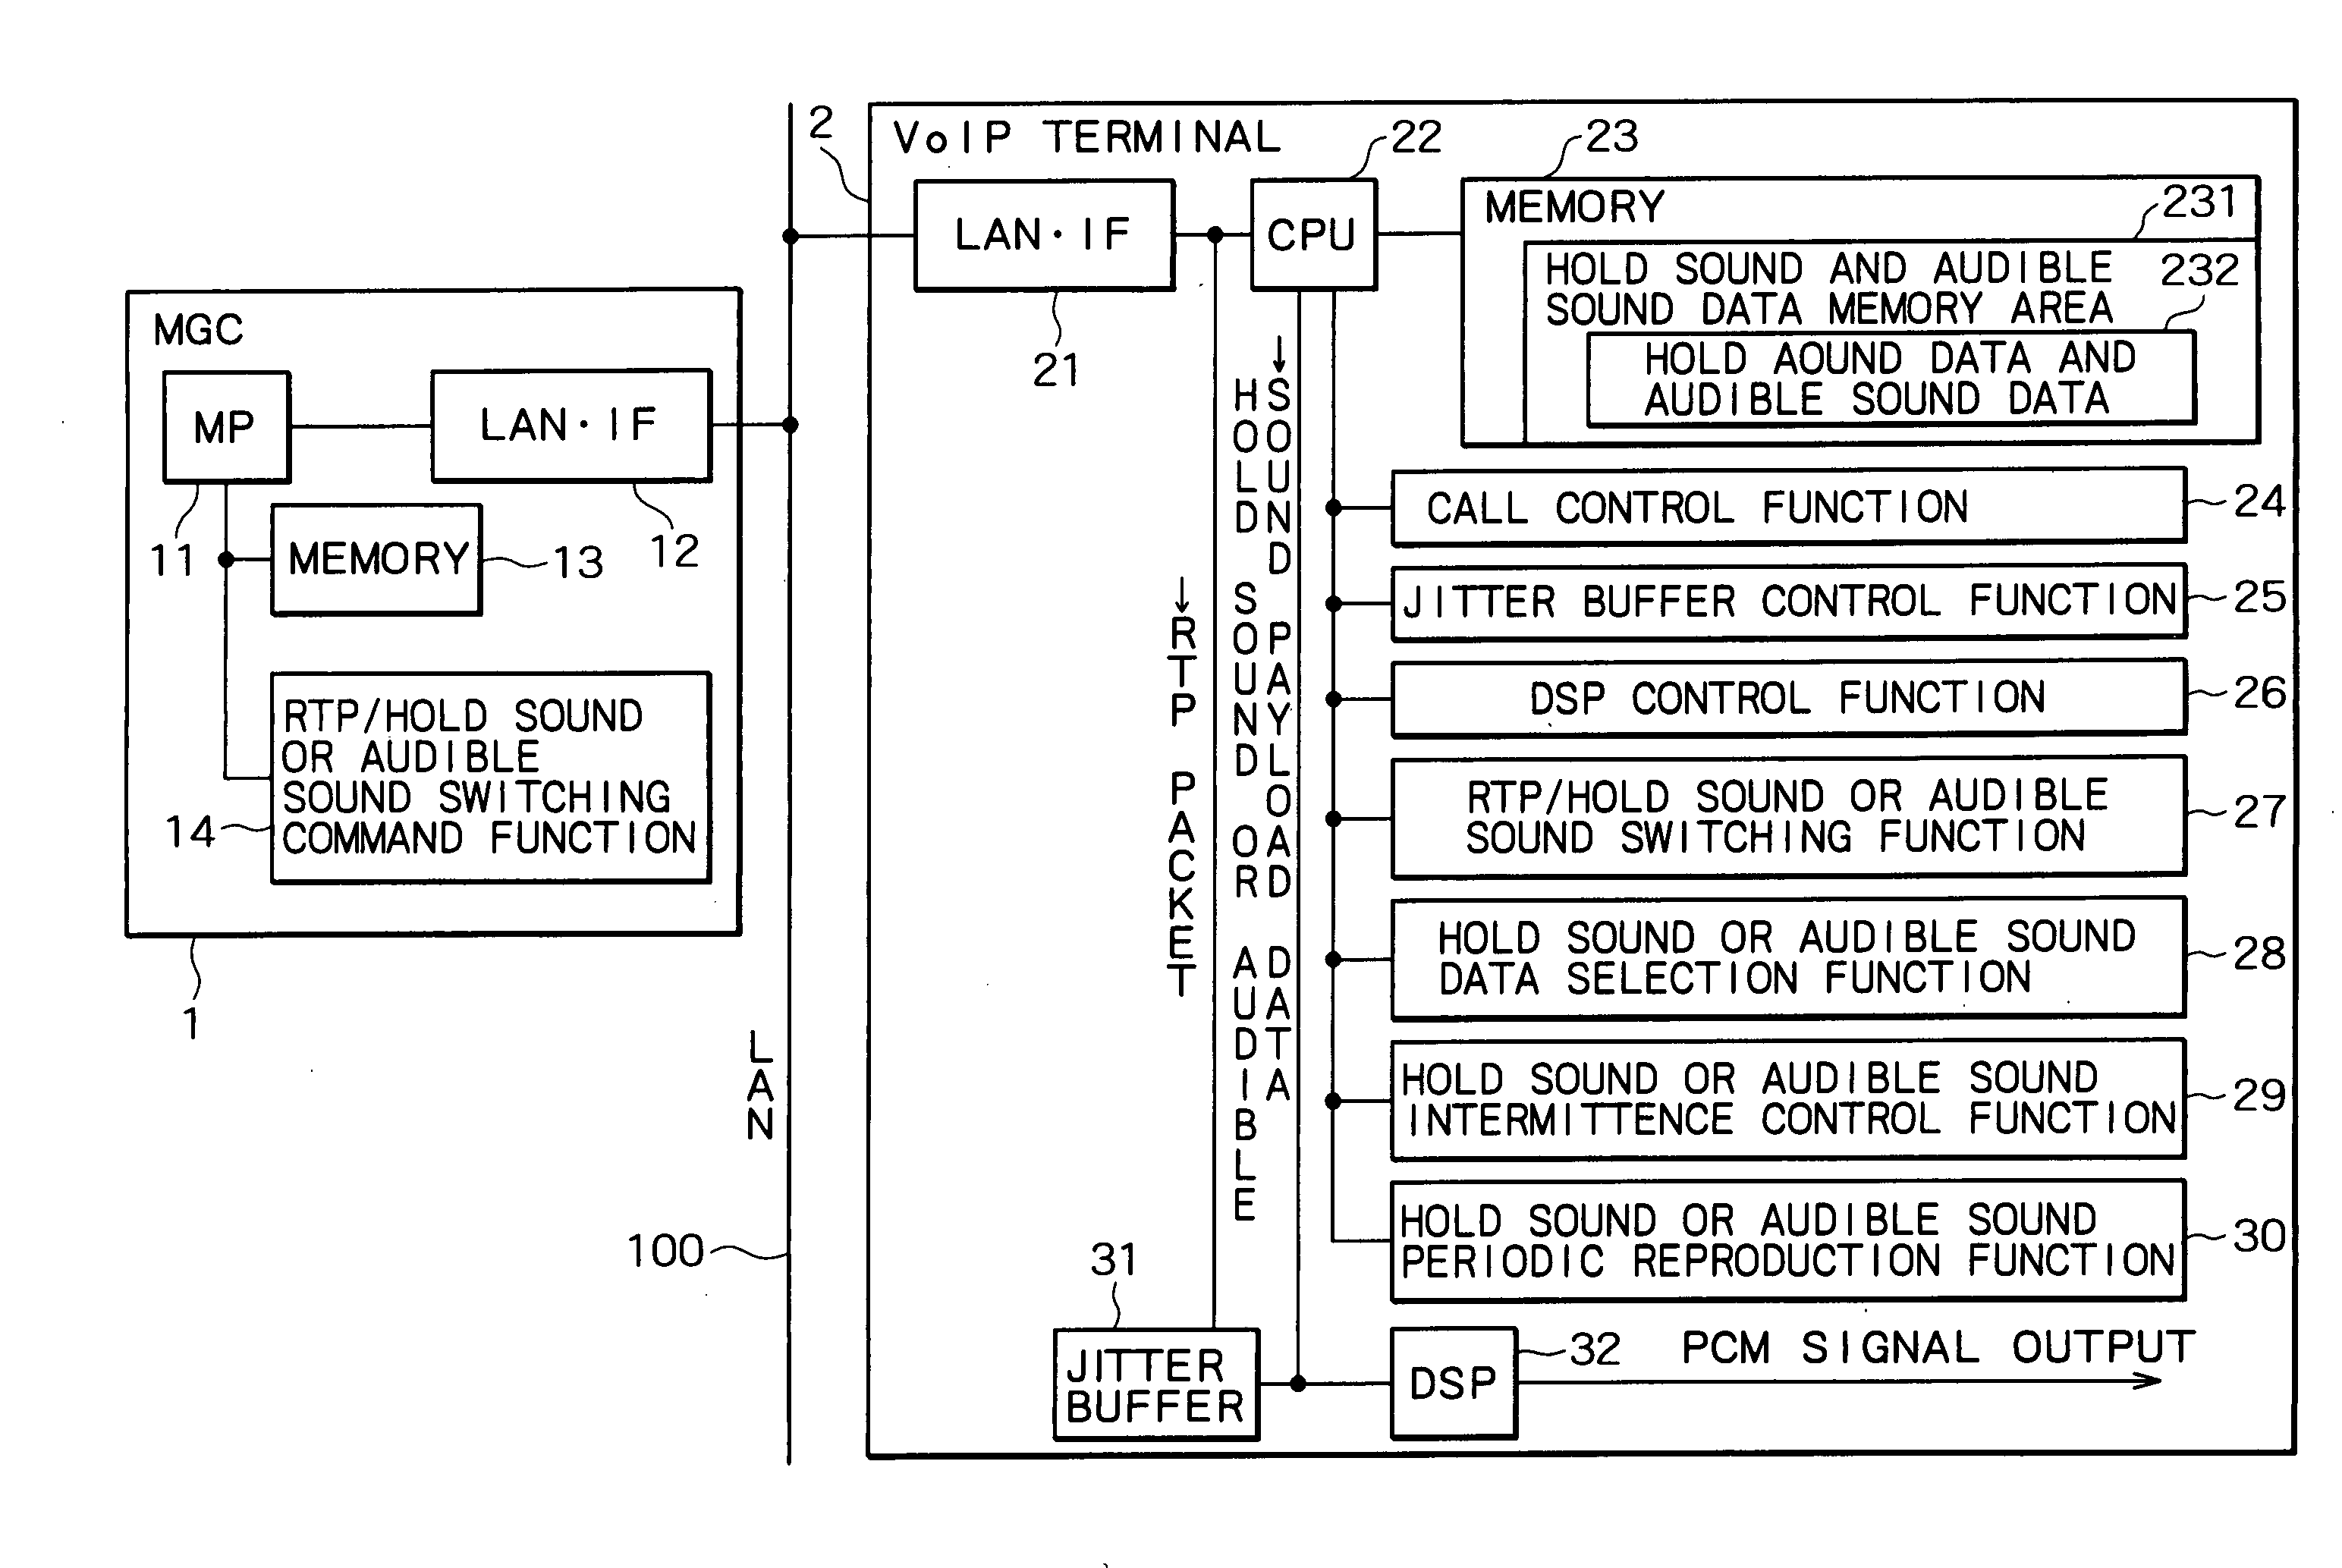 IP telephony system, VoIP terminal, and method and program for reproducing hold sound or audible sound used therein